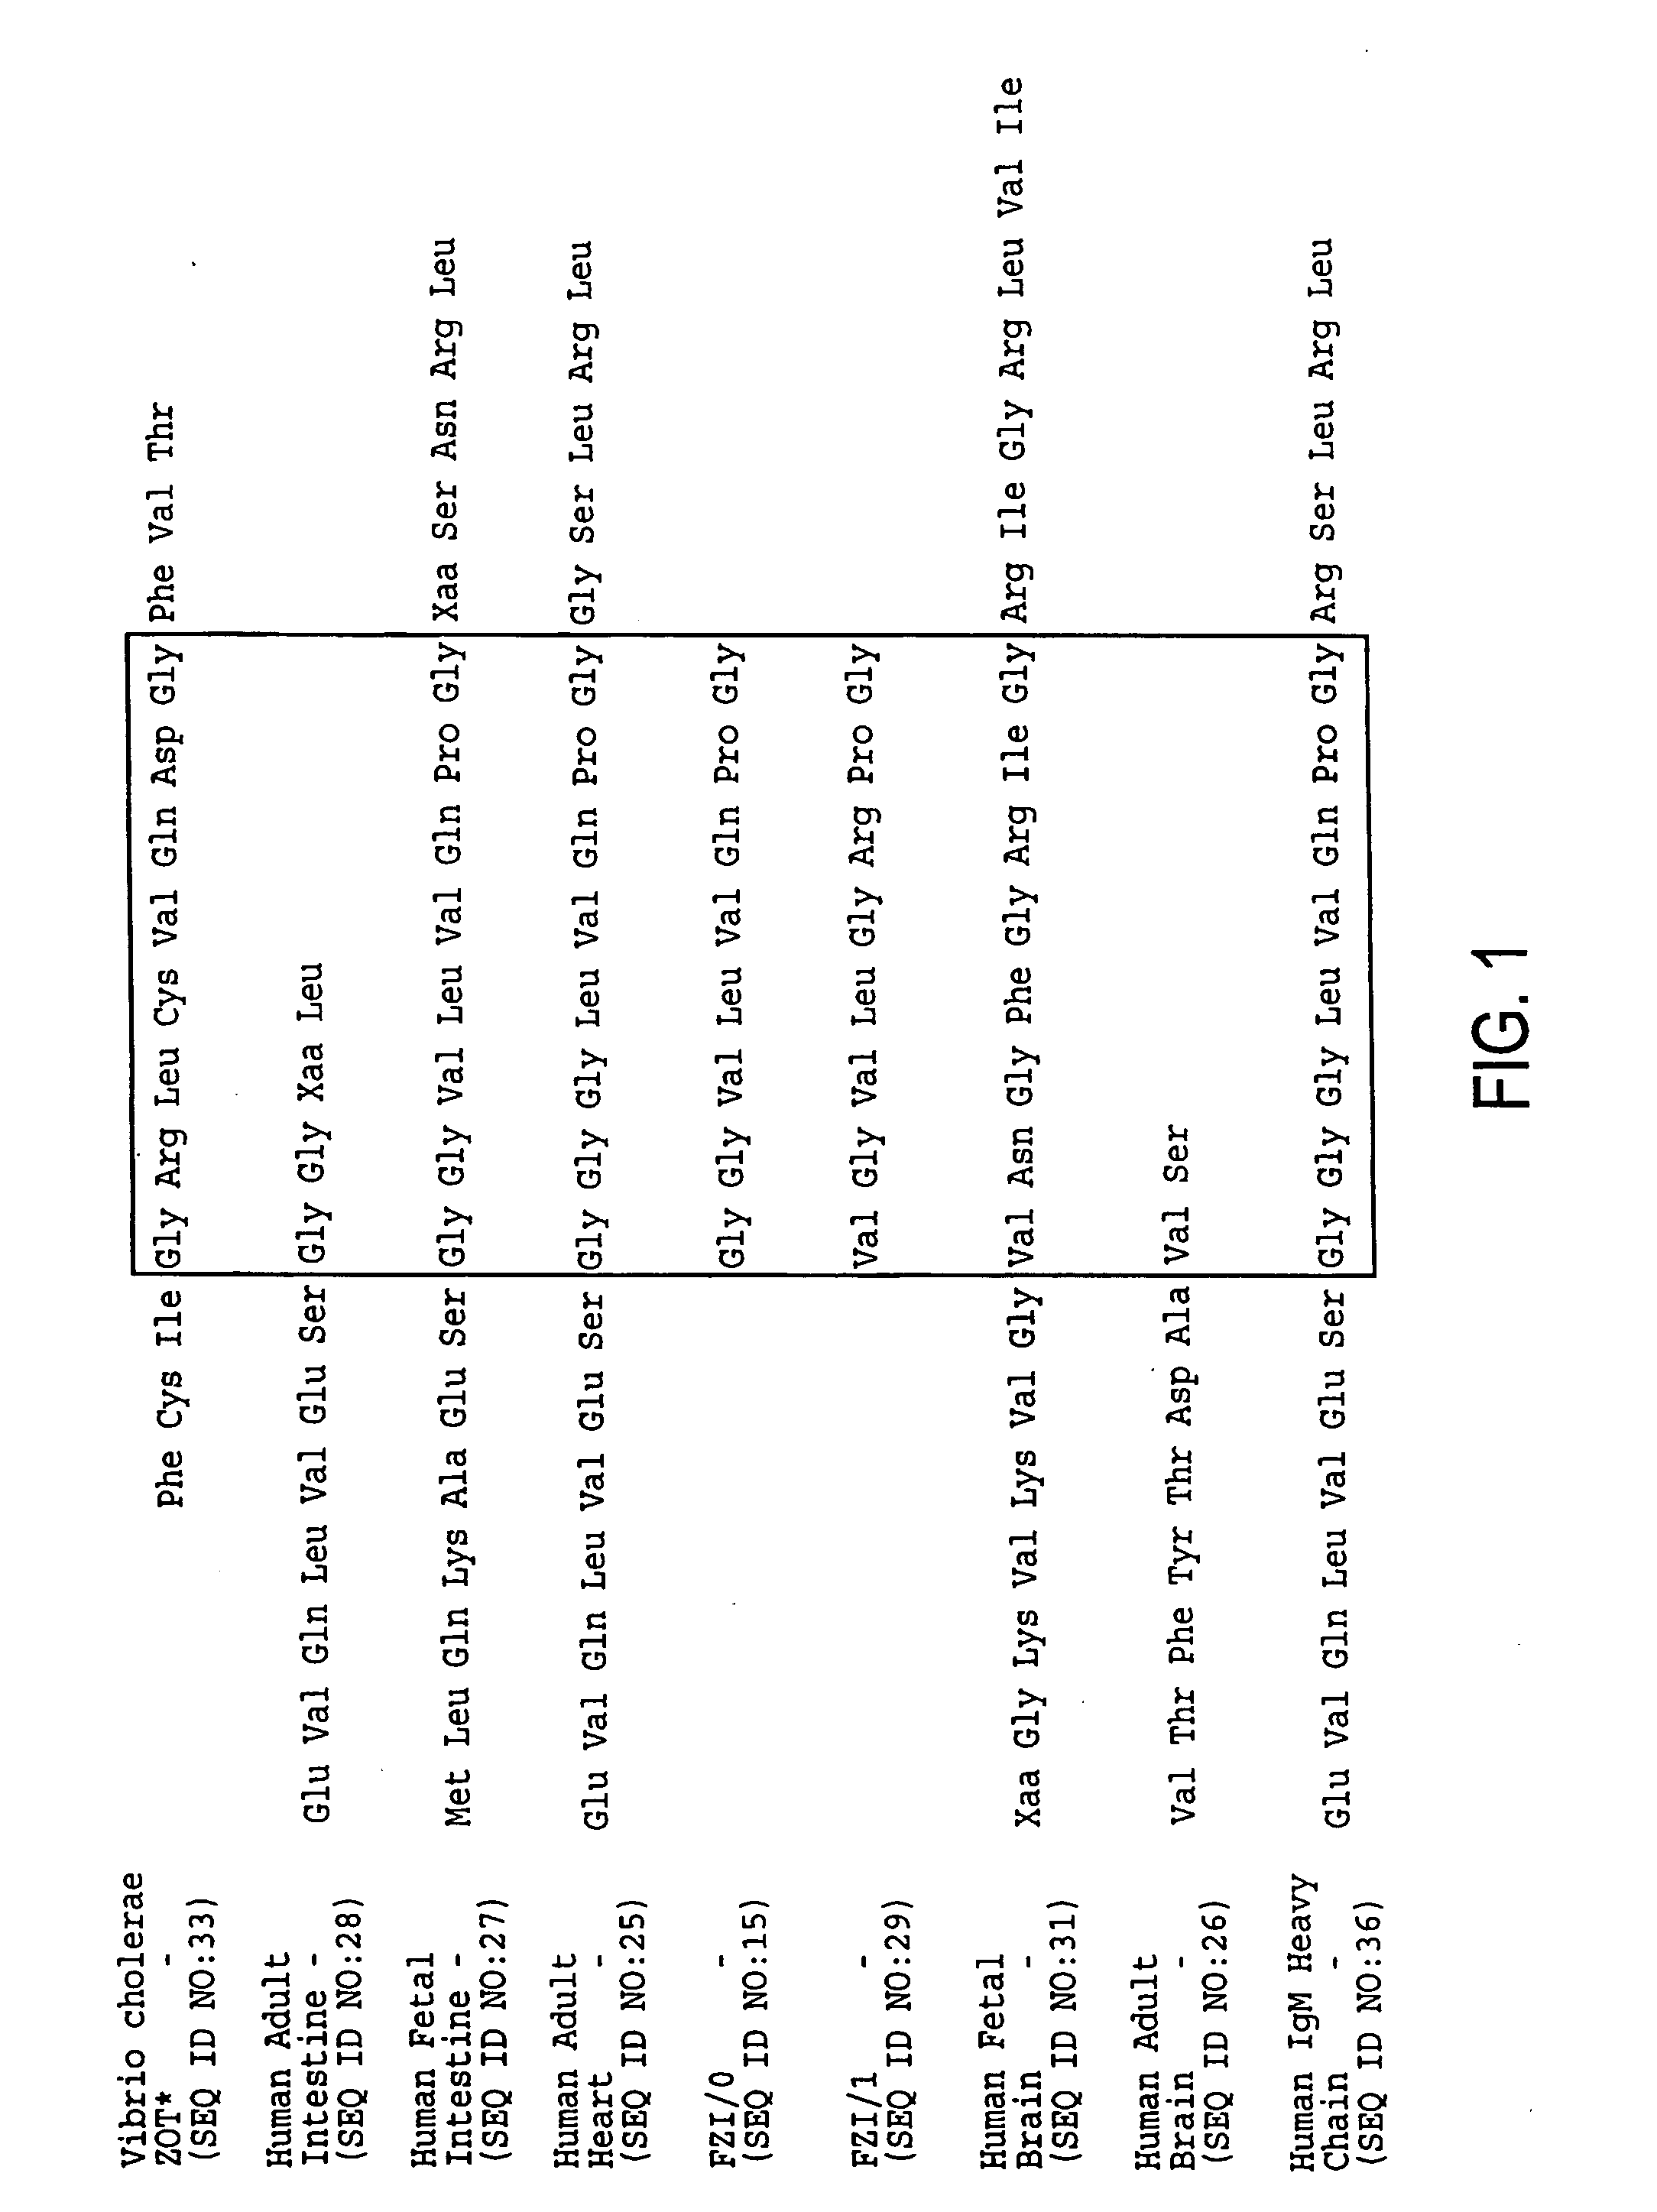 Method of use of peptide antagonists of zonulin to prevent or delay the onset of diabetes